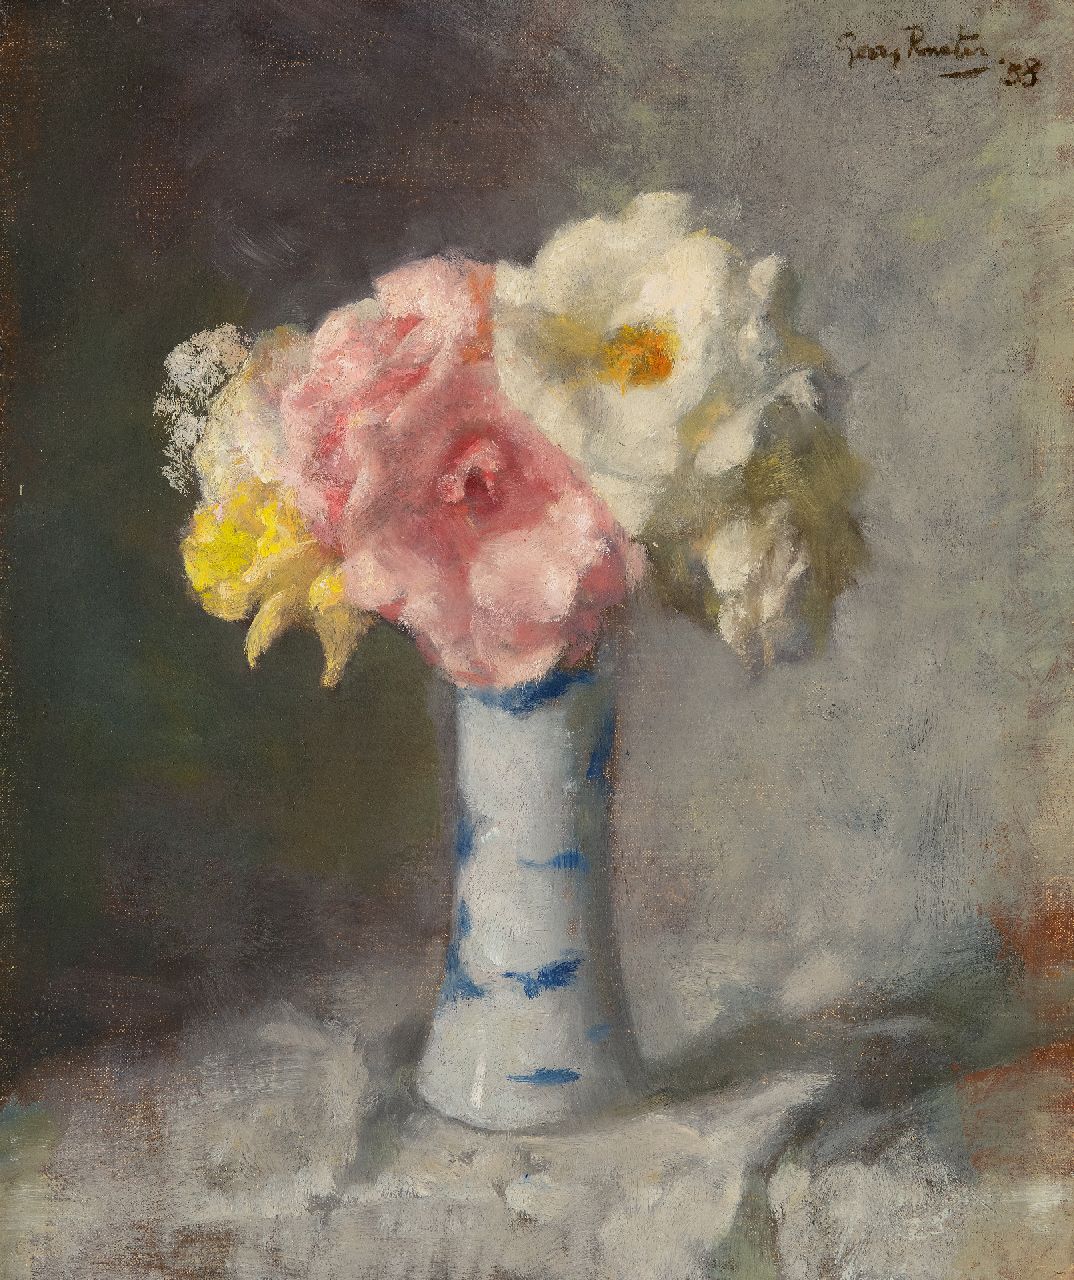 Rueter W.C.G.  | Wilhelm Christian 'Georg' Rueter | Paintings offered for sale | Roses in a porcelain vase, oil on canvas 43.6 x 36.0 cm, signed u.r. and dated '38